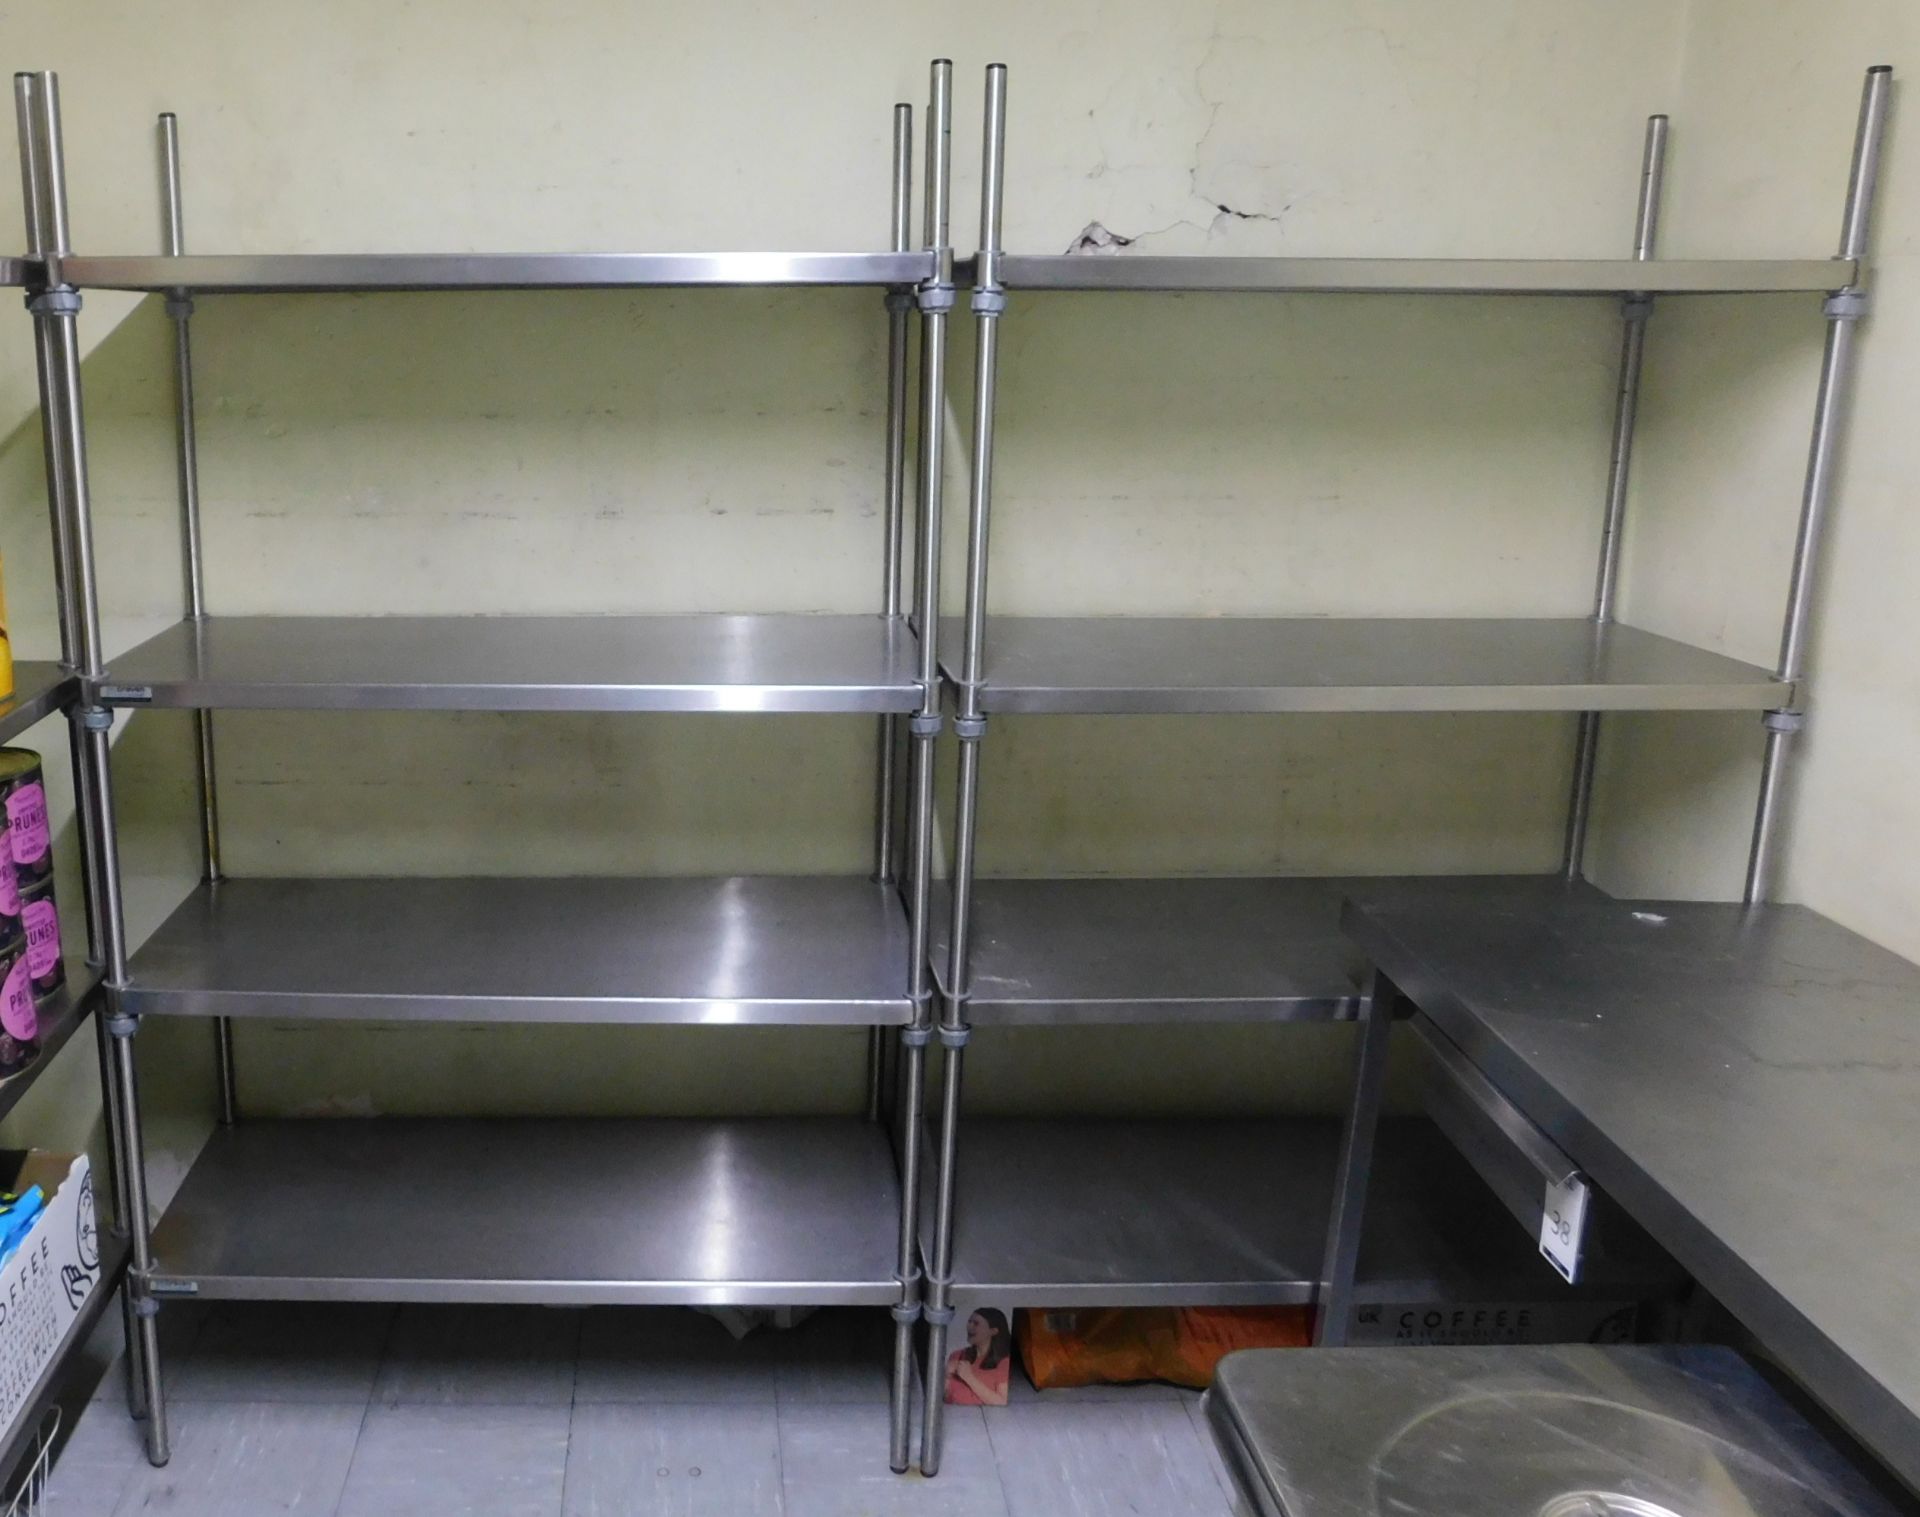 Five, 4-Tier Stainless Steel Light Weight Racking Shelf Units (Excluding Contents) (Location - Bild 2 aus 2